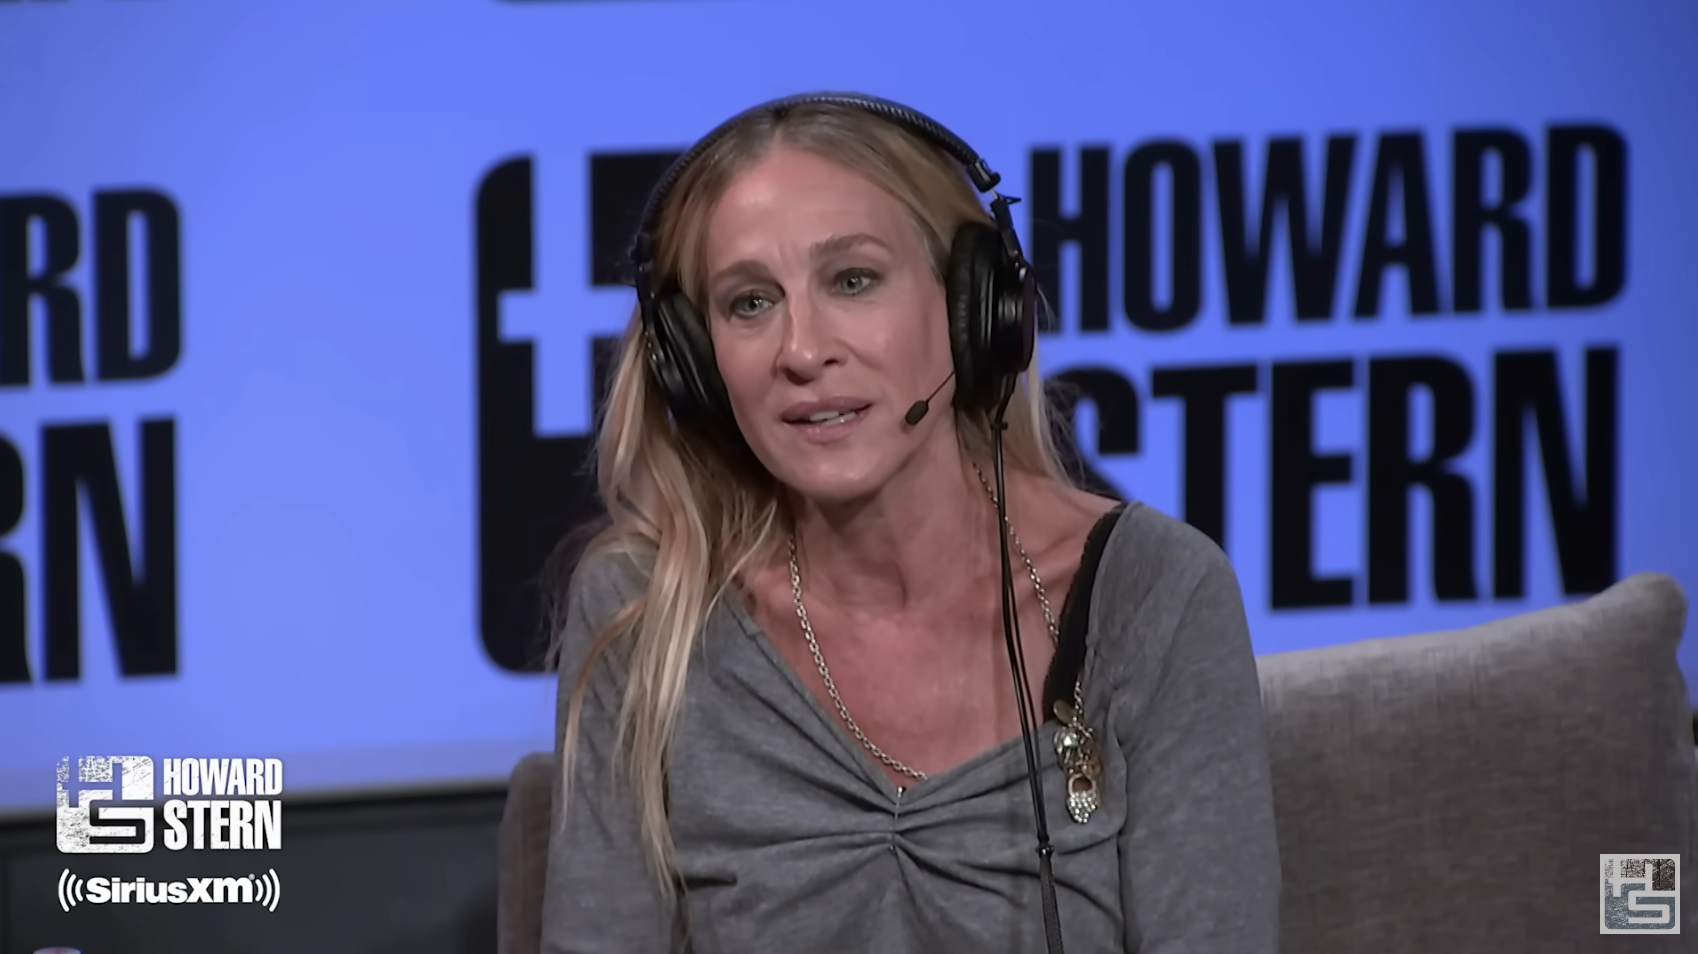 Close-up of SJP on the Howard Stern set